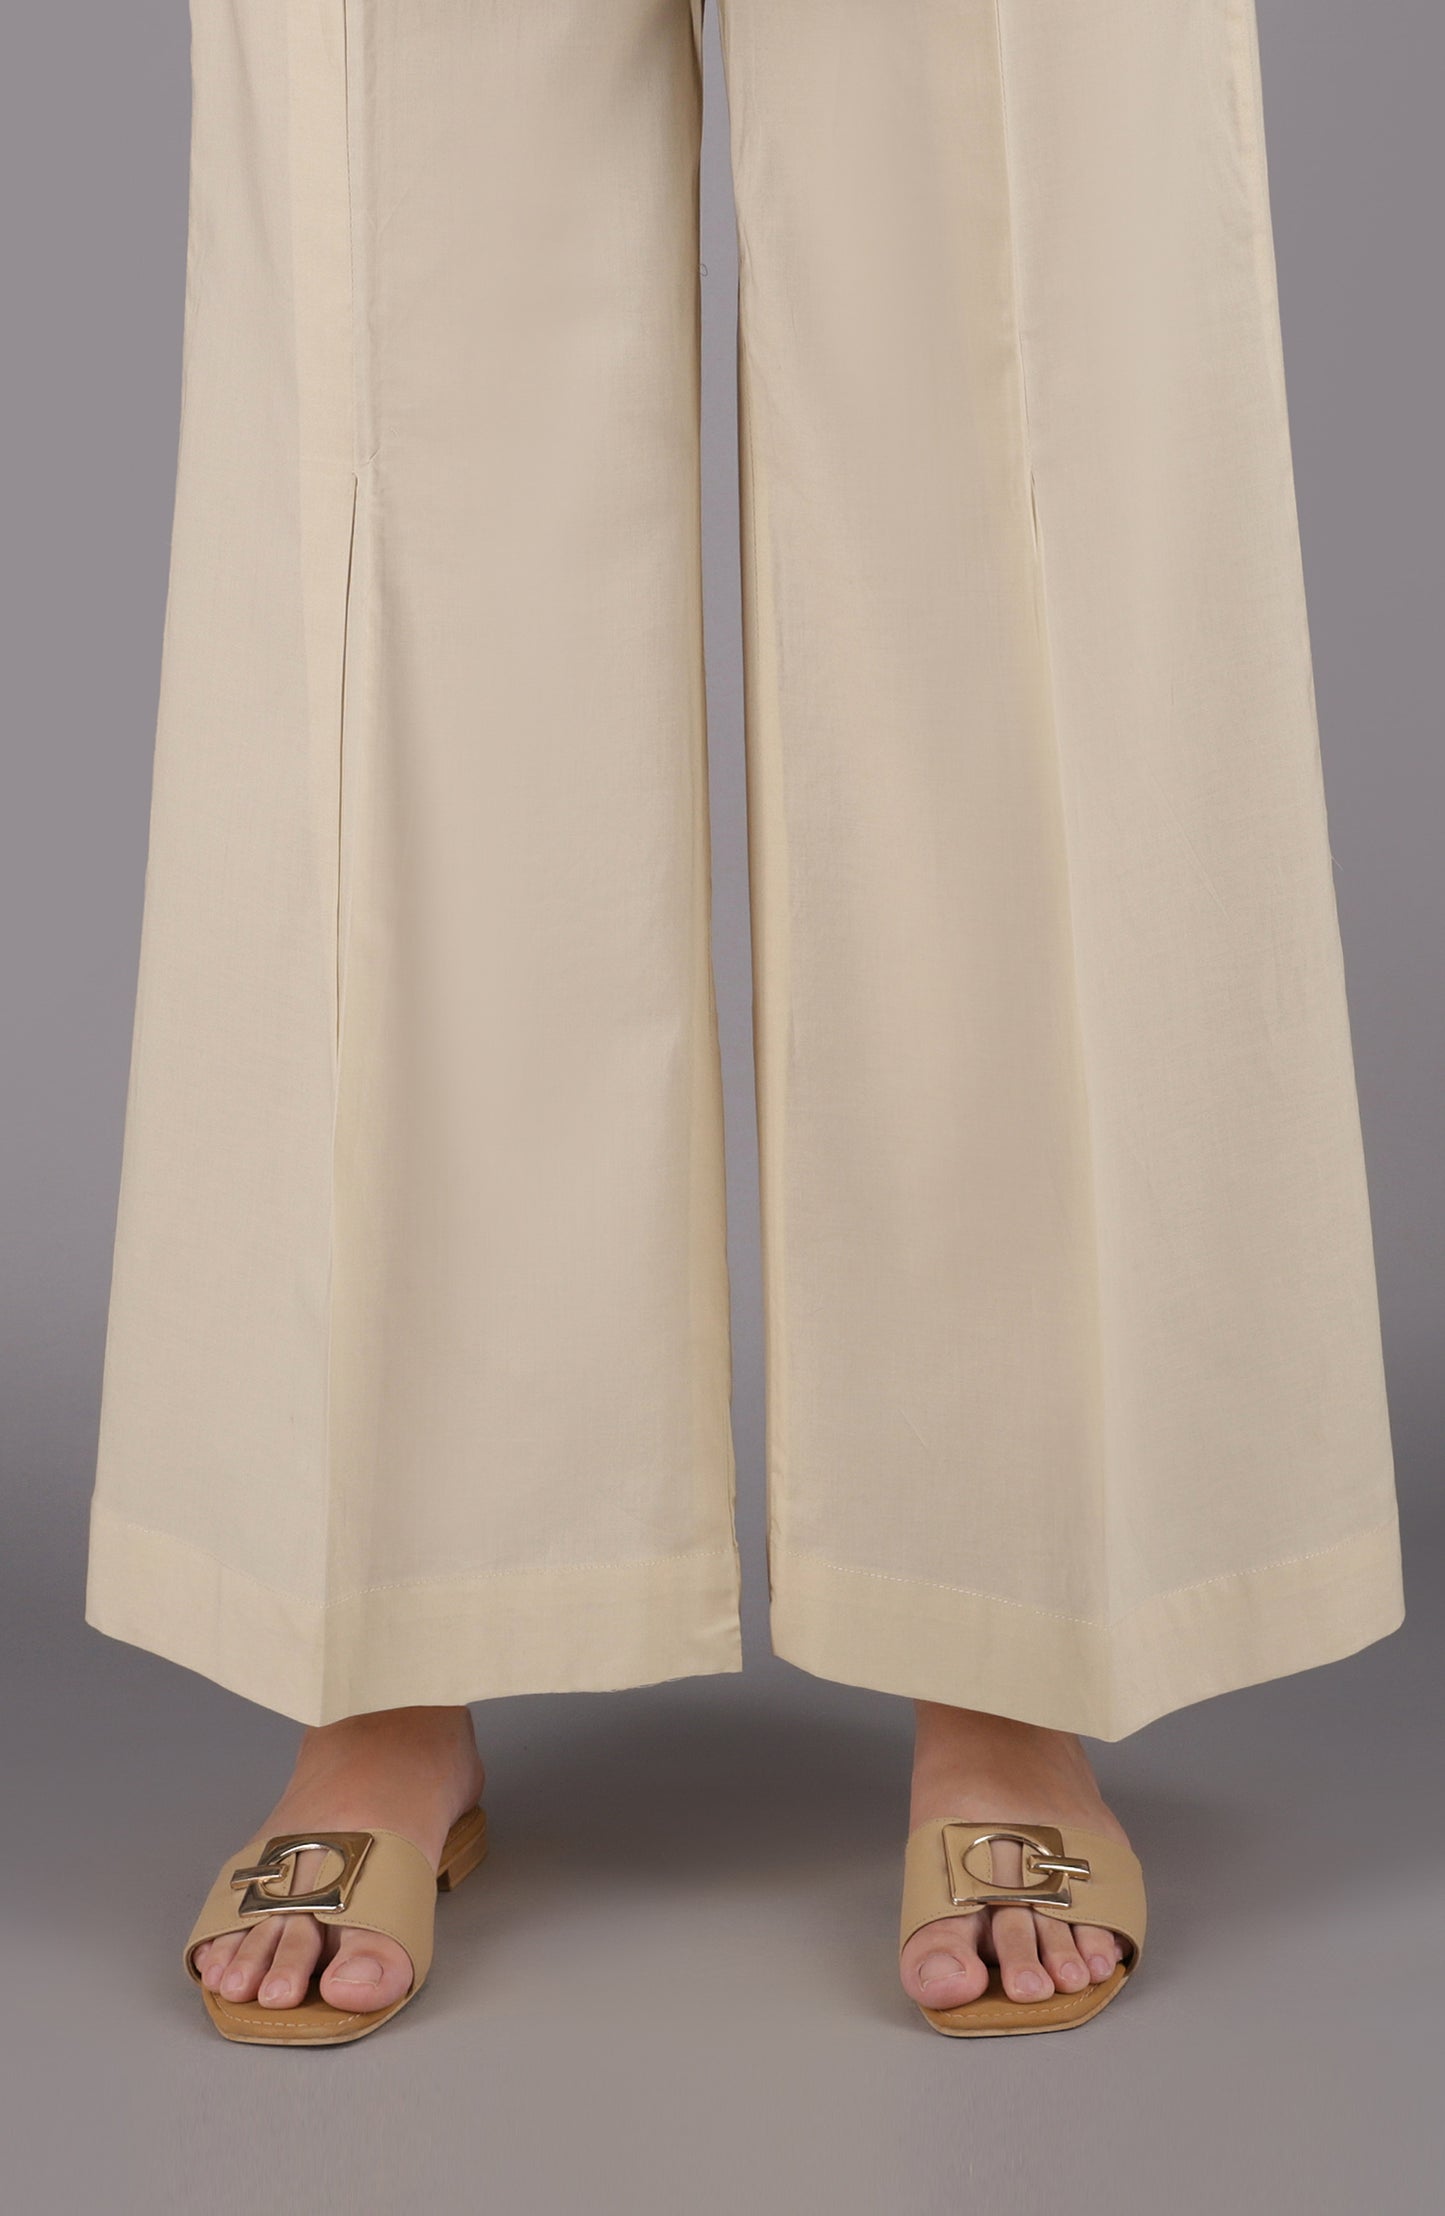 NRP-100/S BEIGE CAMBRIC SCPANTS STITCHED BOTTOMS PANTS